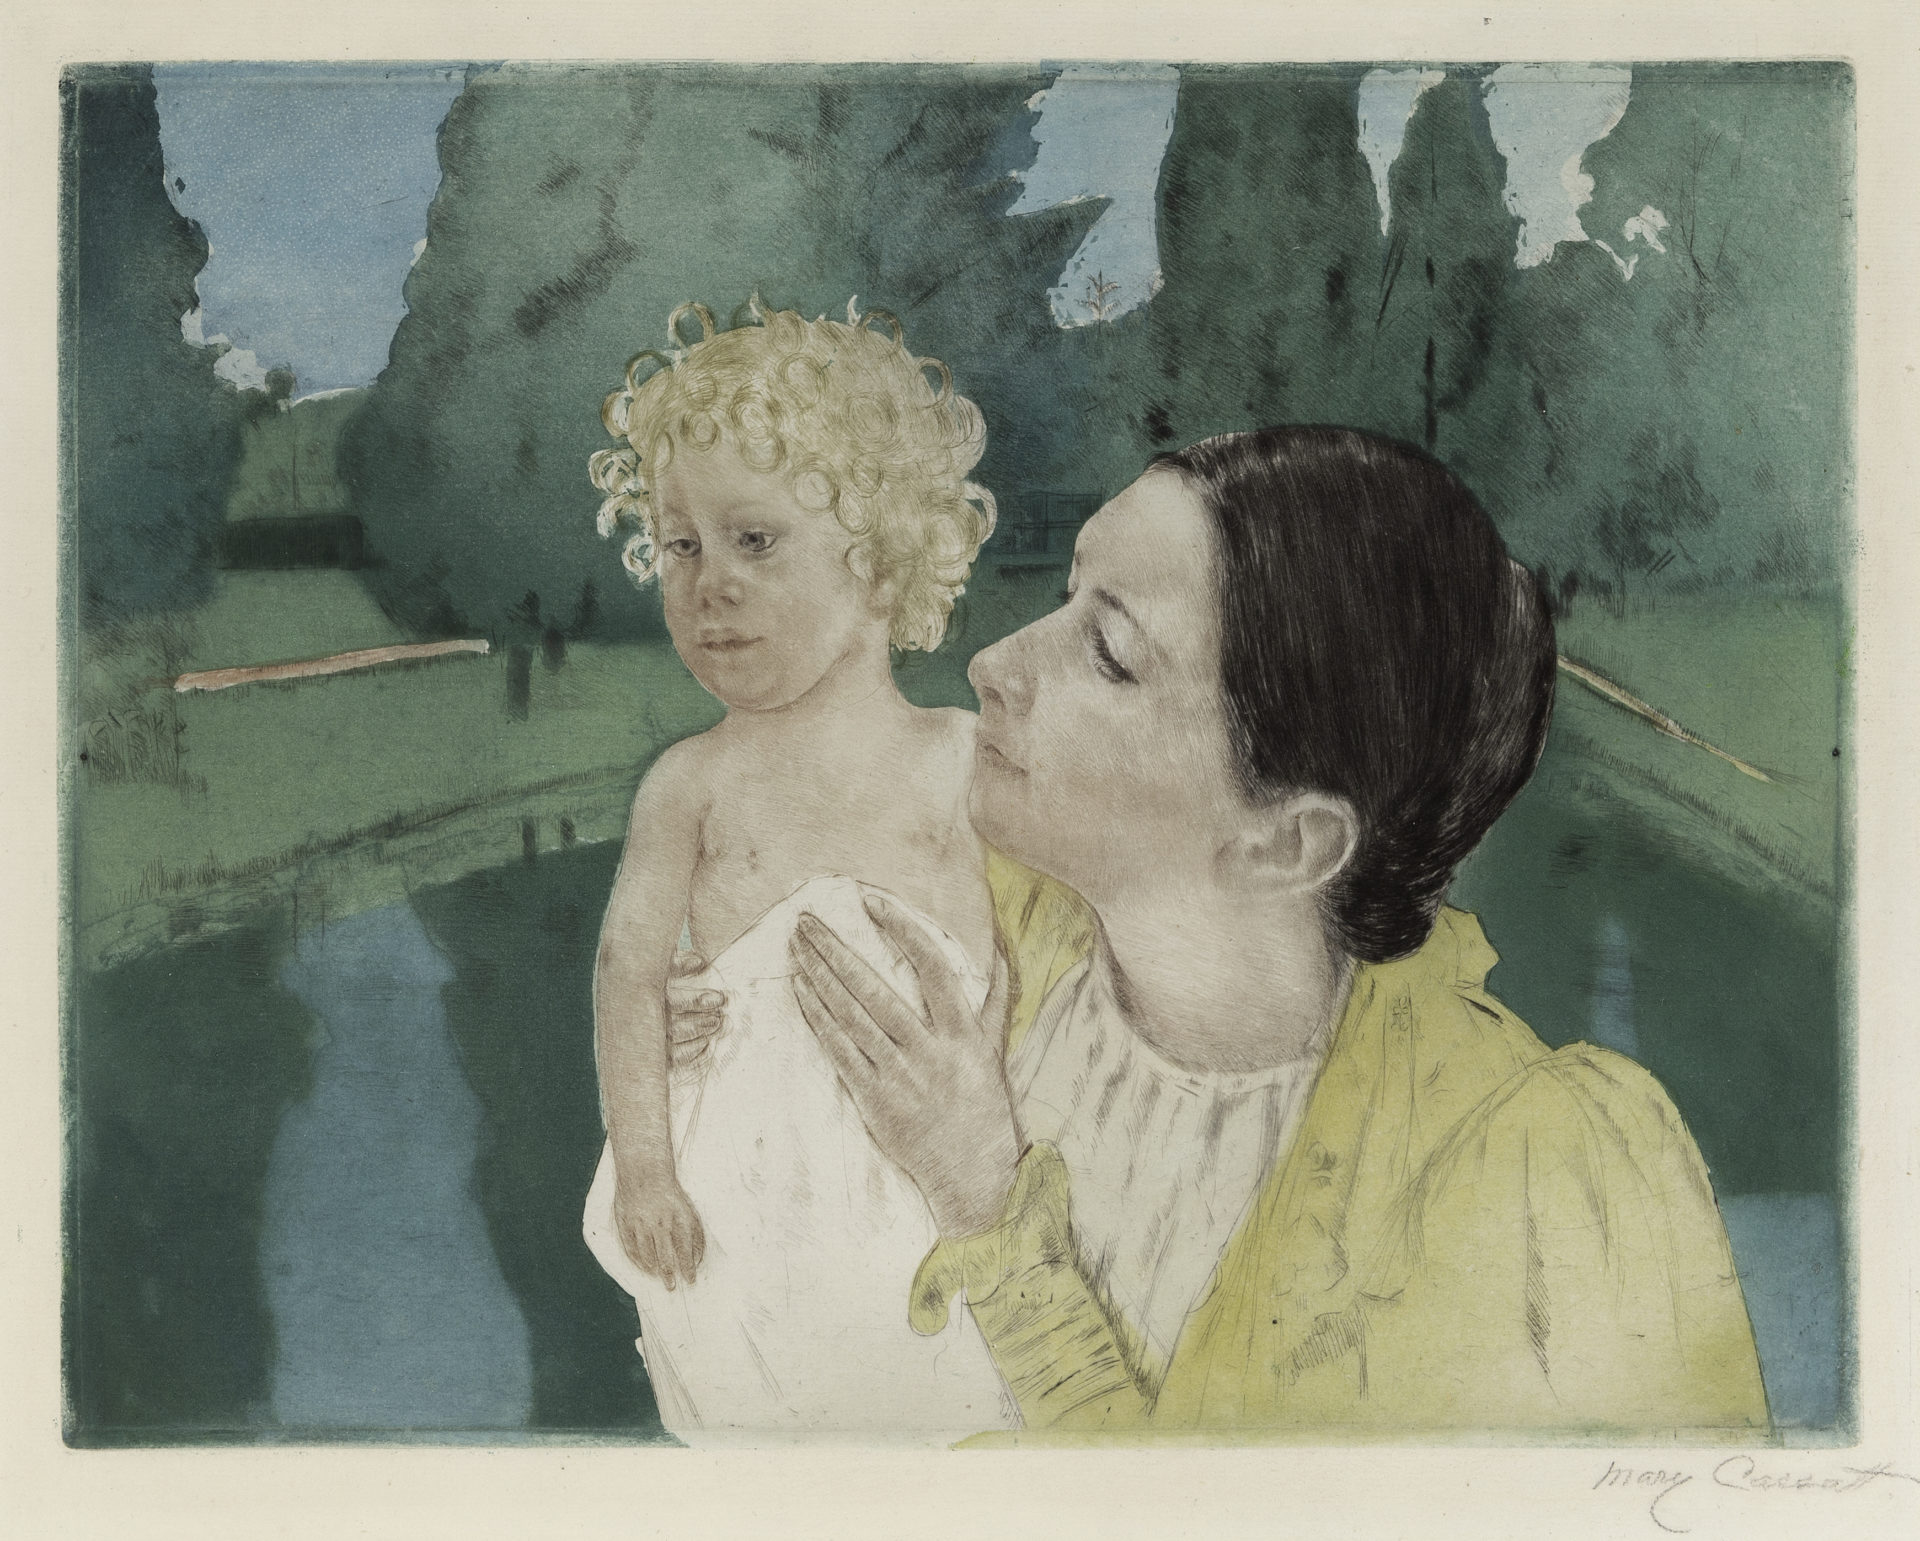 By the Pond (Fourth State), c. 1896 Color drypoint and aquatint Image: 13 x 16 7/8 inches (33 x 42.9 cm) Paper: 16 5/8 x 19 3/4 inches (42.2 x 50.2 cm)